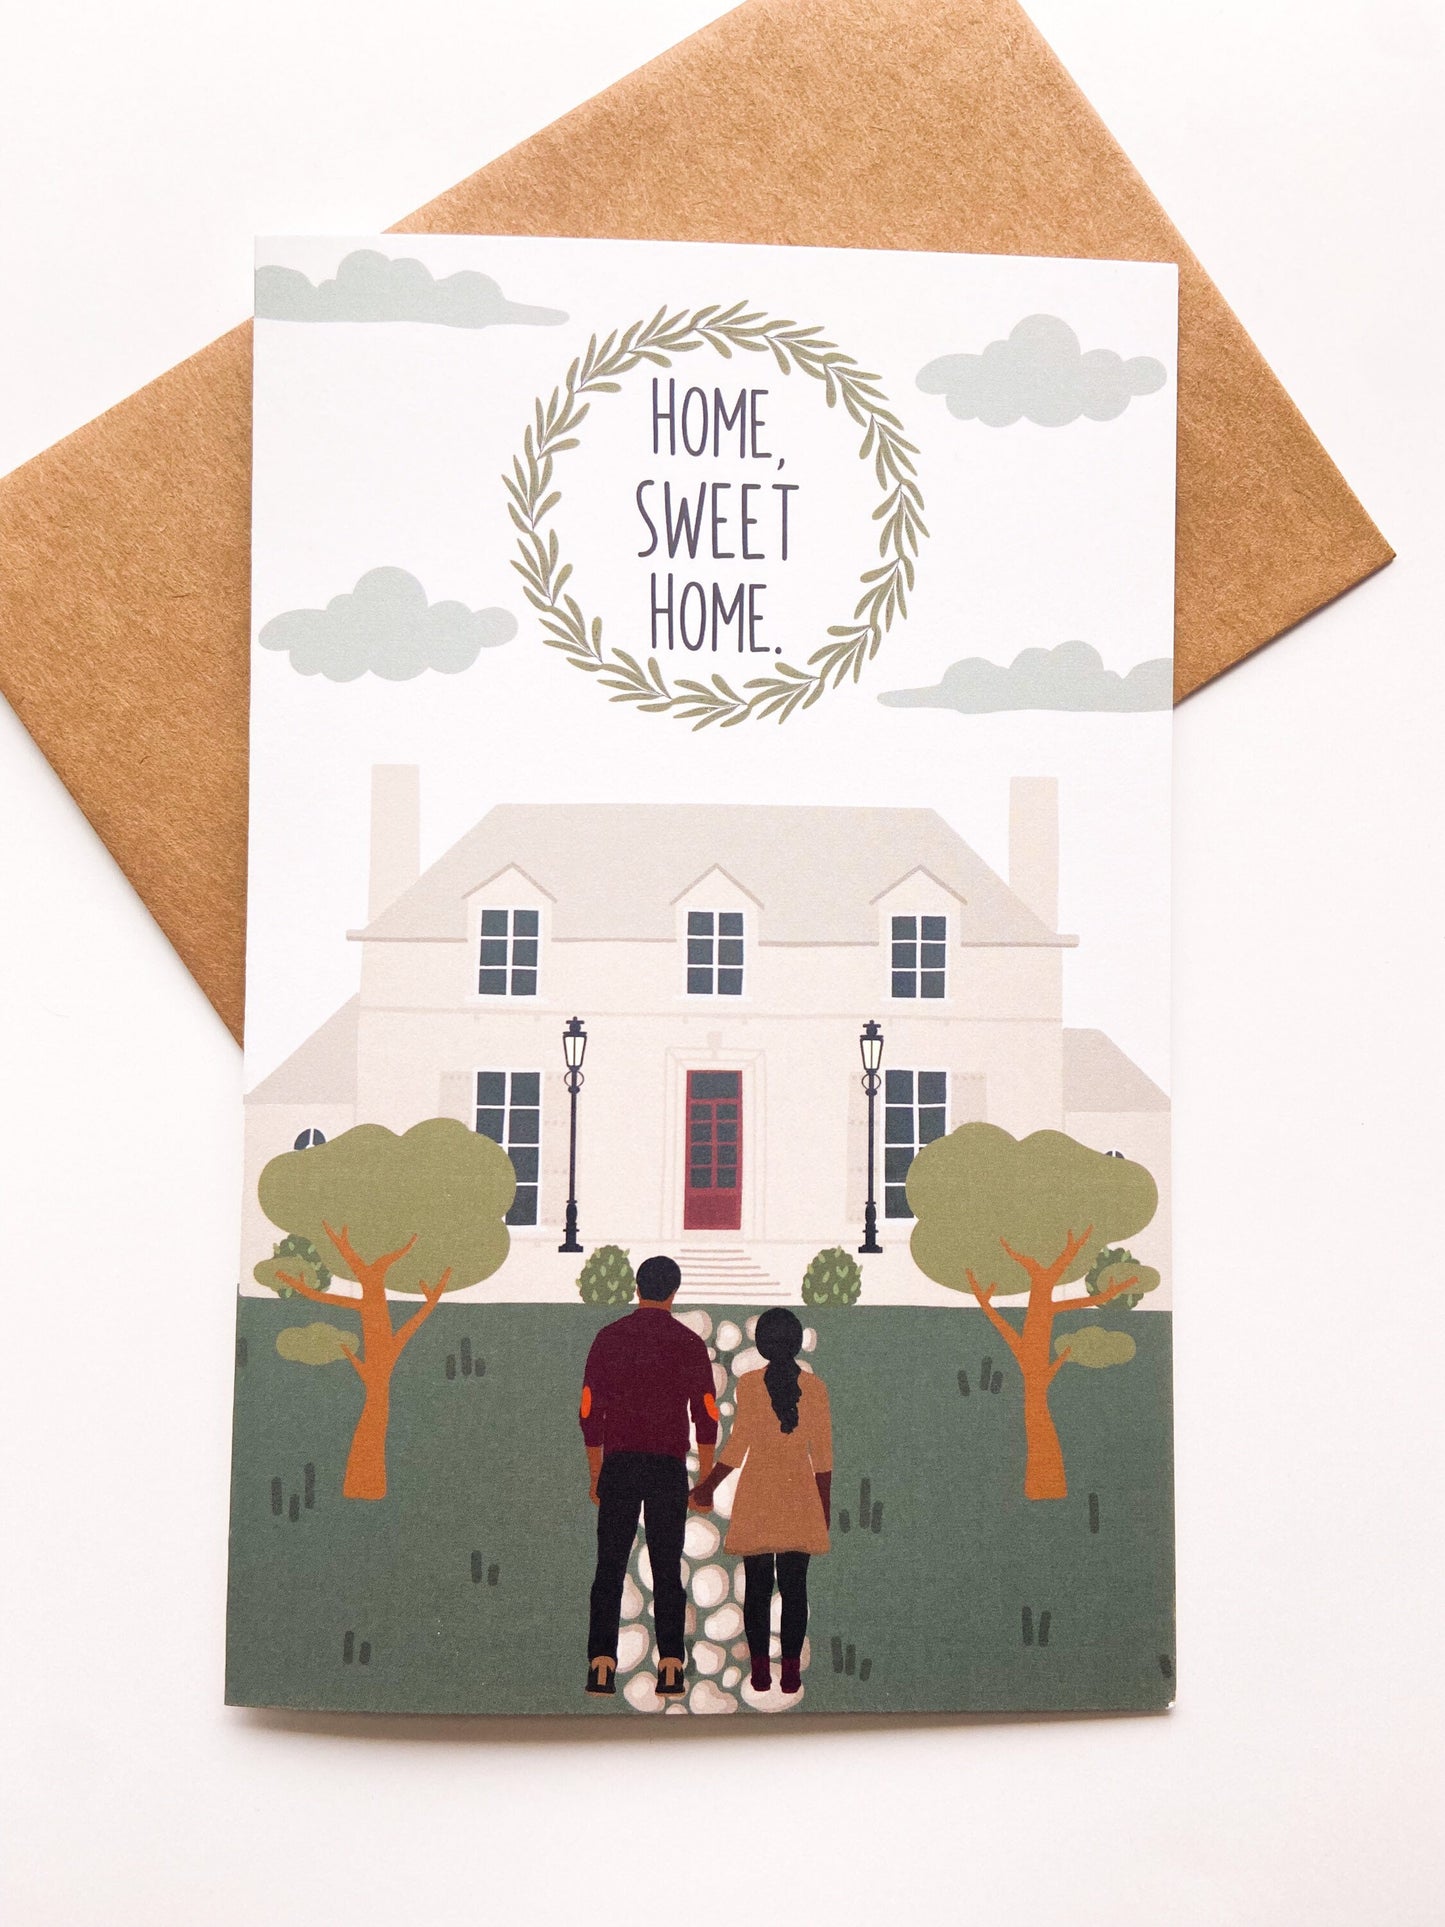 New Homeowners Greeting Card, Home Sweet Home Card, Homeowner Gifts, Realtor Gifts, African American Greeting Cards, Closing Gifts, Blank